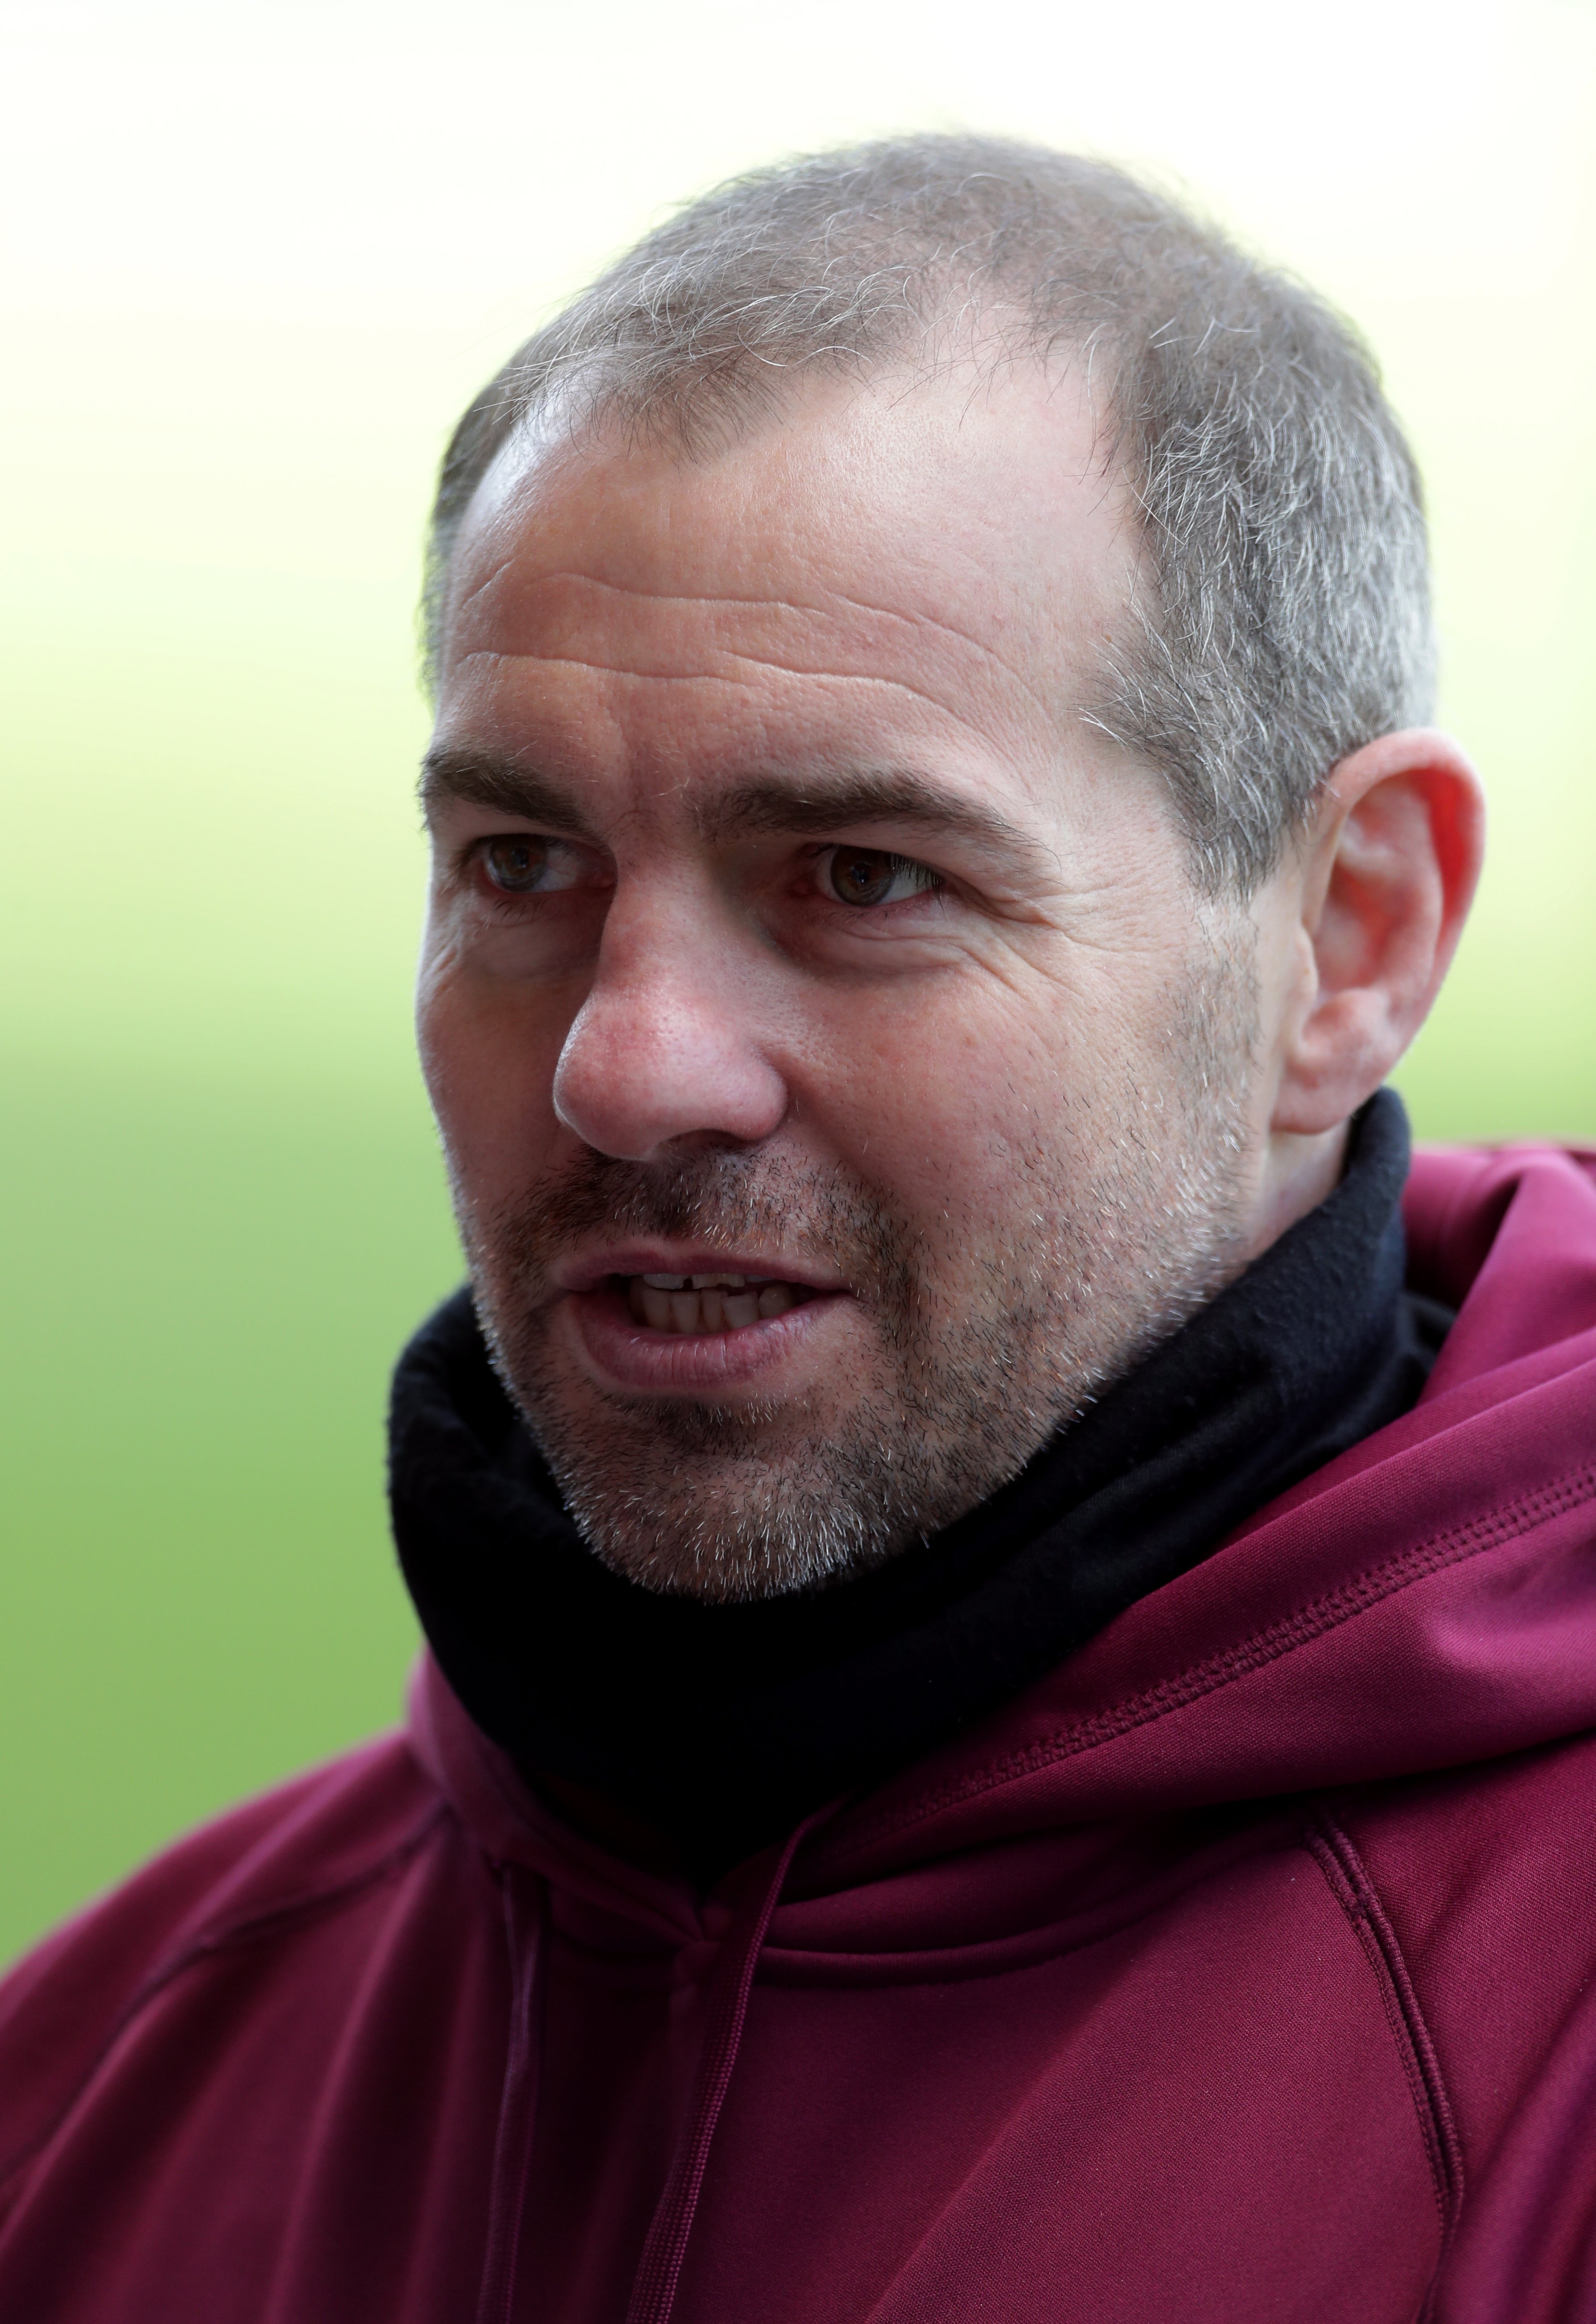 Huddersfield coach Ian Watson was always confident he could turn around the club’s fortunes (PA Images/Richard Sellers)